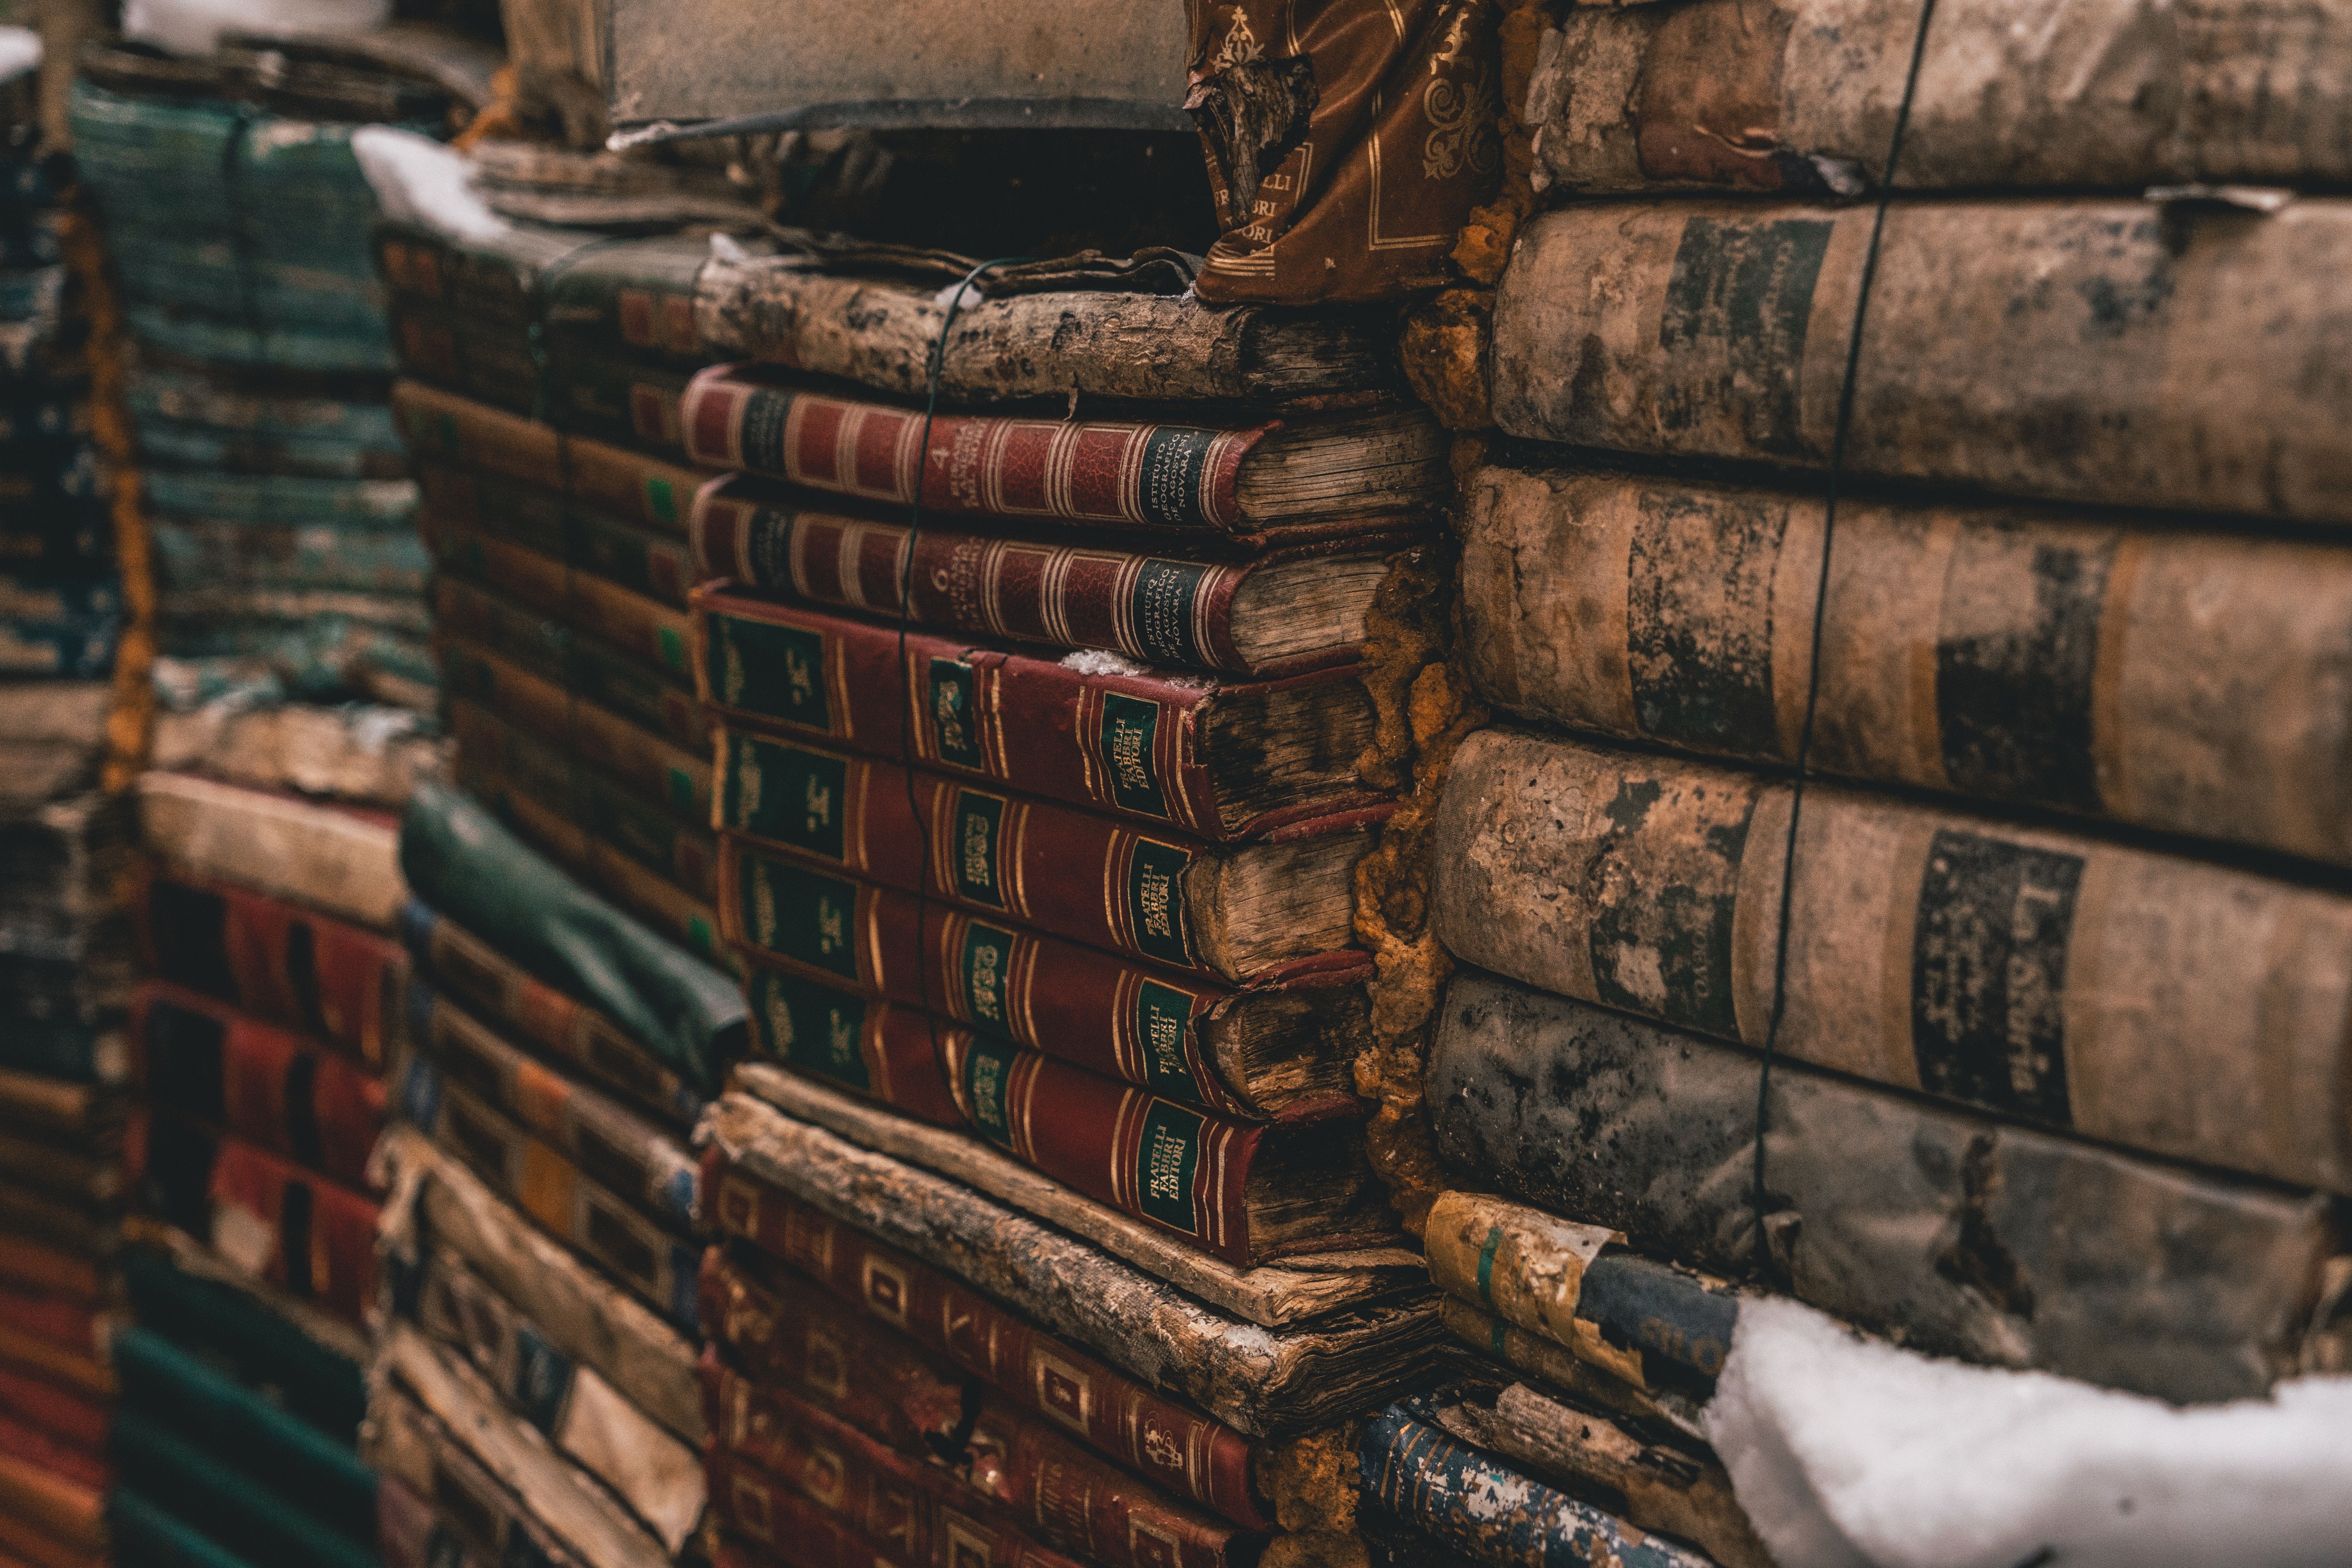 6000x4000 #background, #culture, #vintage, #read, #stack, #antique, #library, #old, #snow, #book, #ancient, #wallpaper, #red, #Public domain image, #ice, #books, #brown, #stacked, #repetitive. Mocah HD Wallpaper